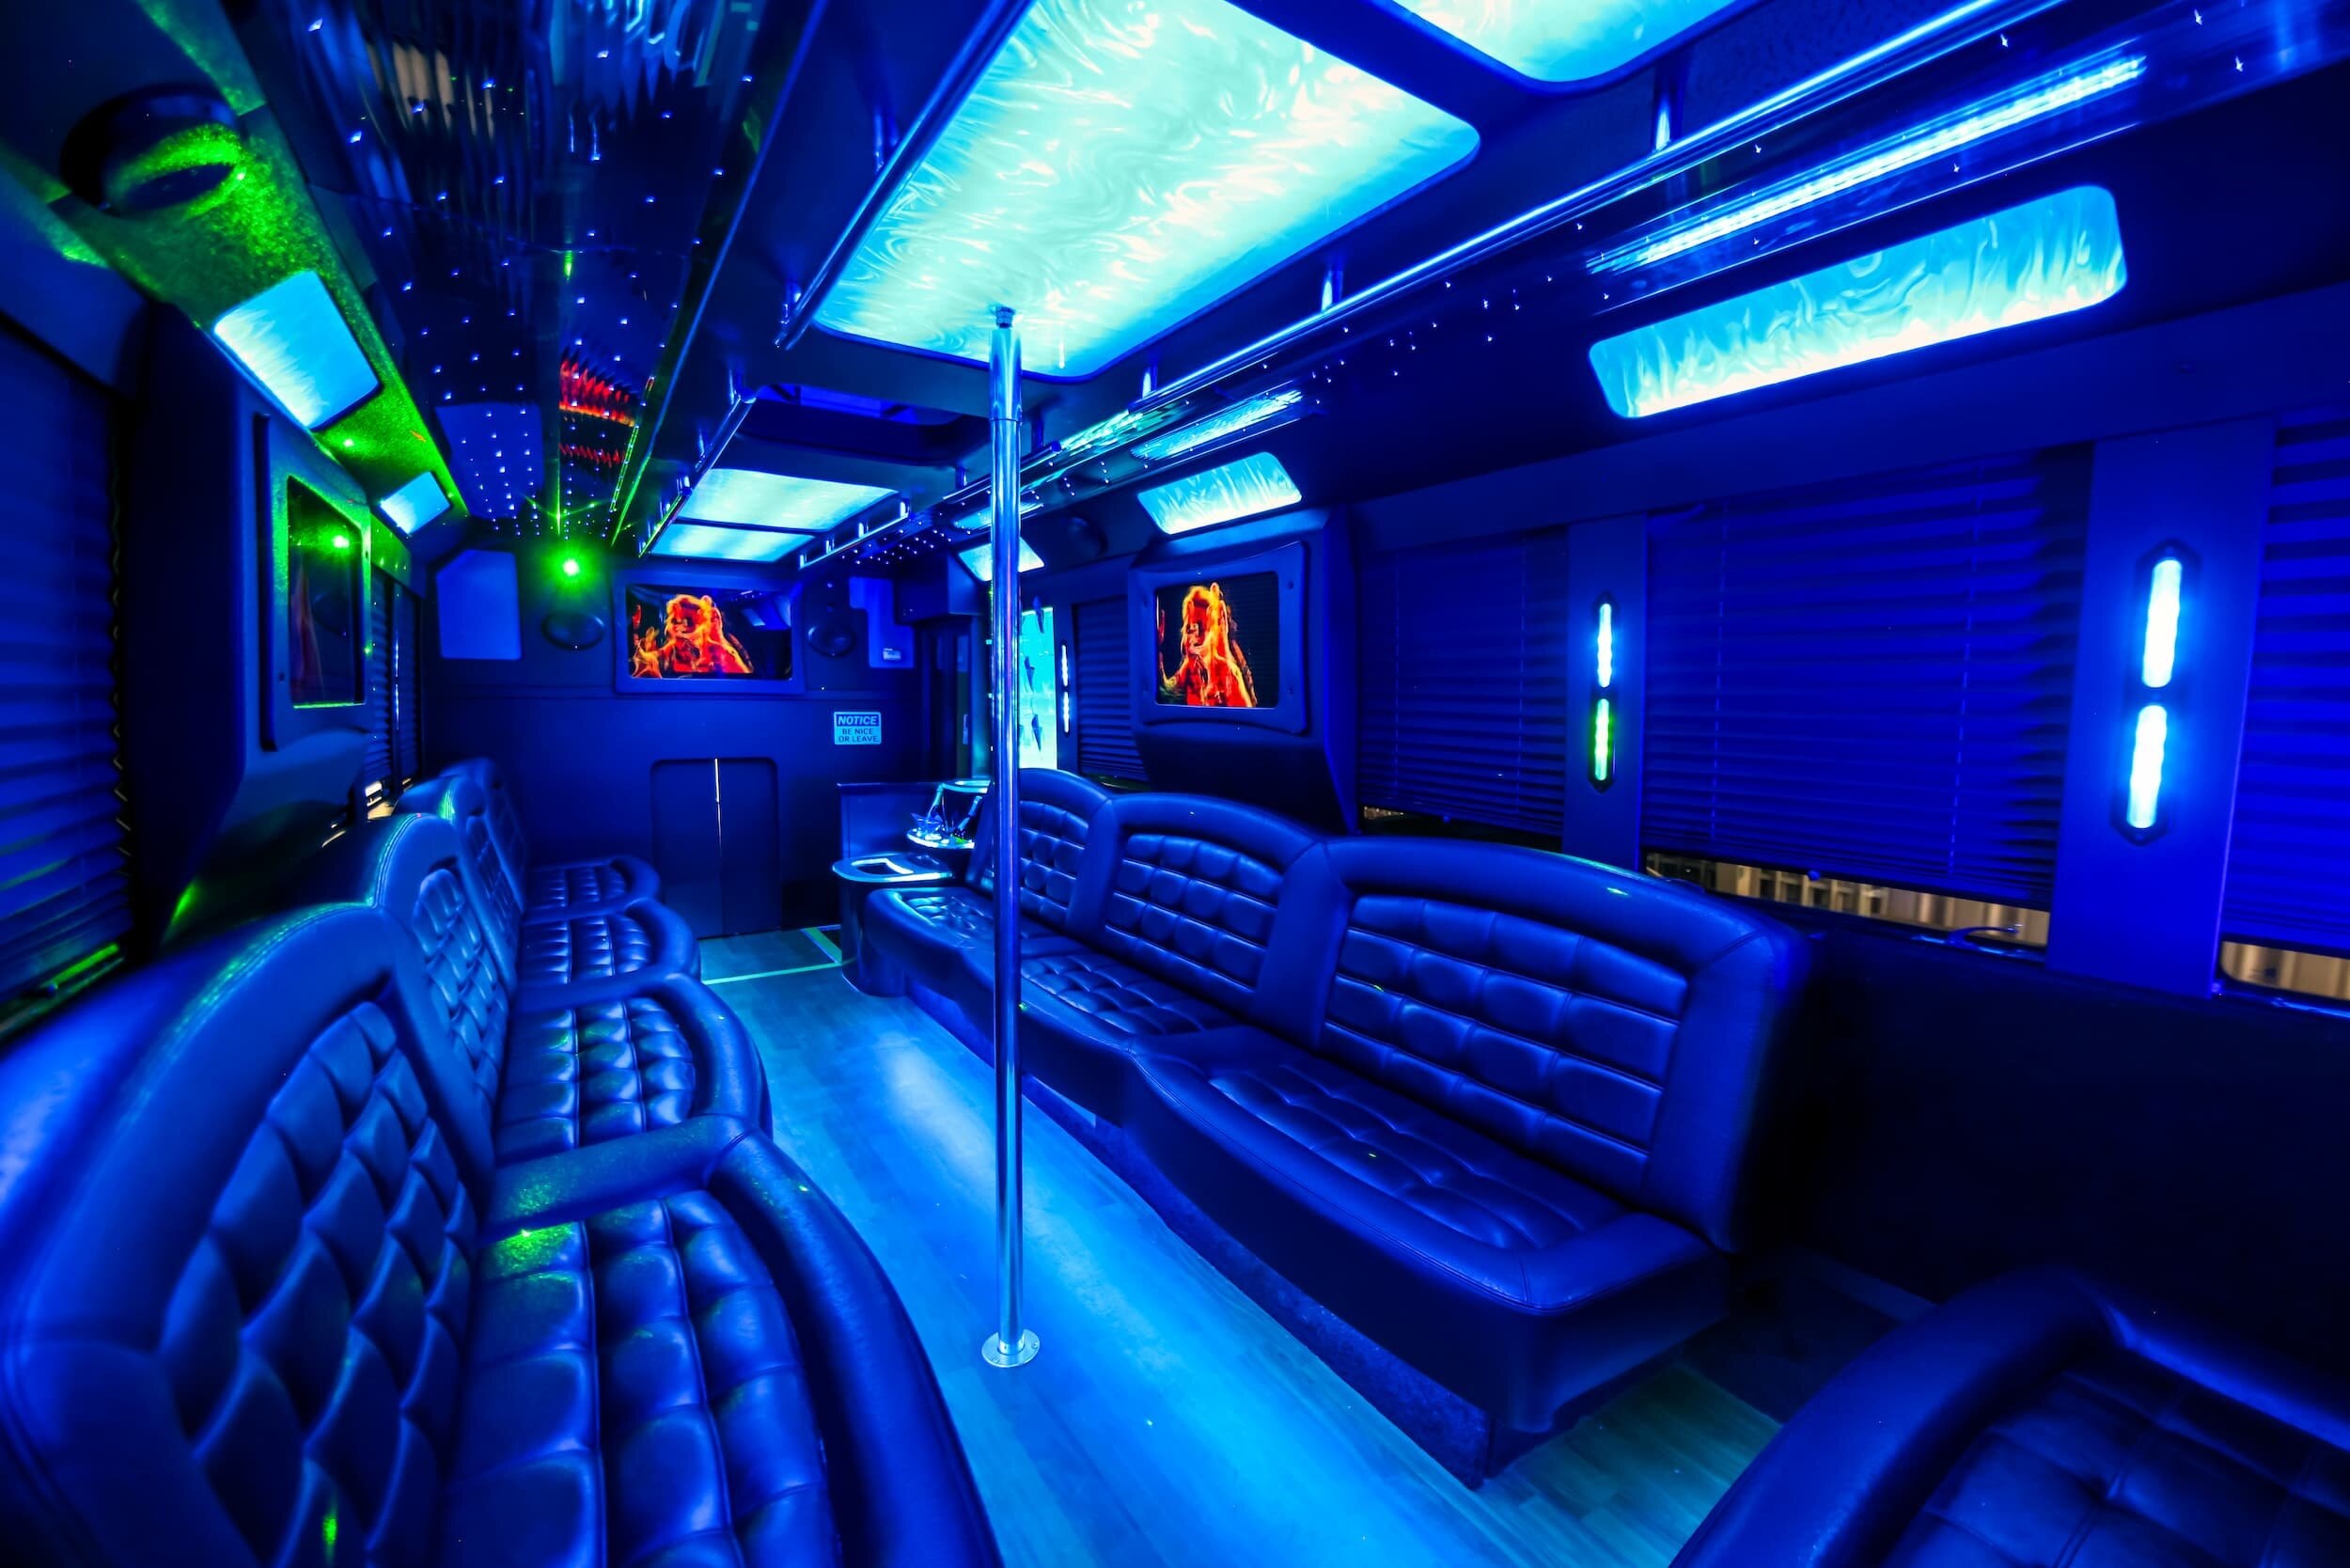 On What Occasions Party Bus for Sale are Used?